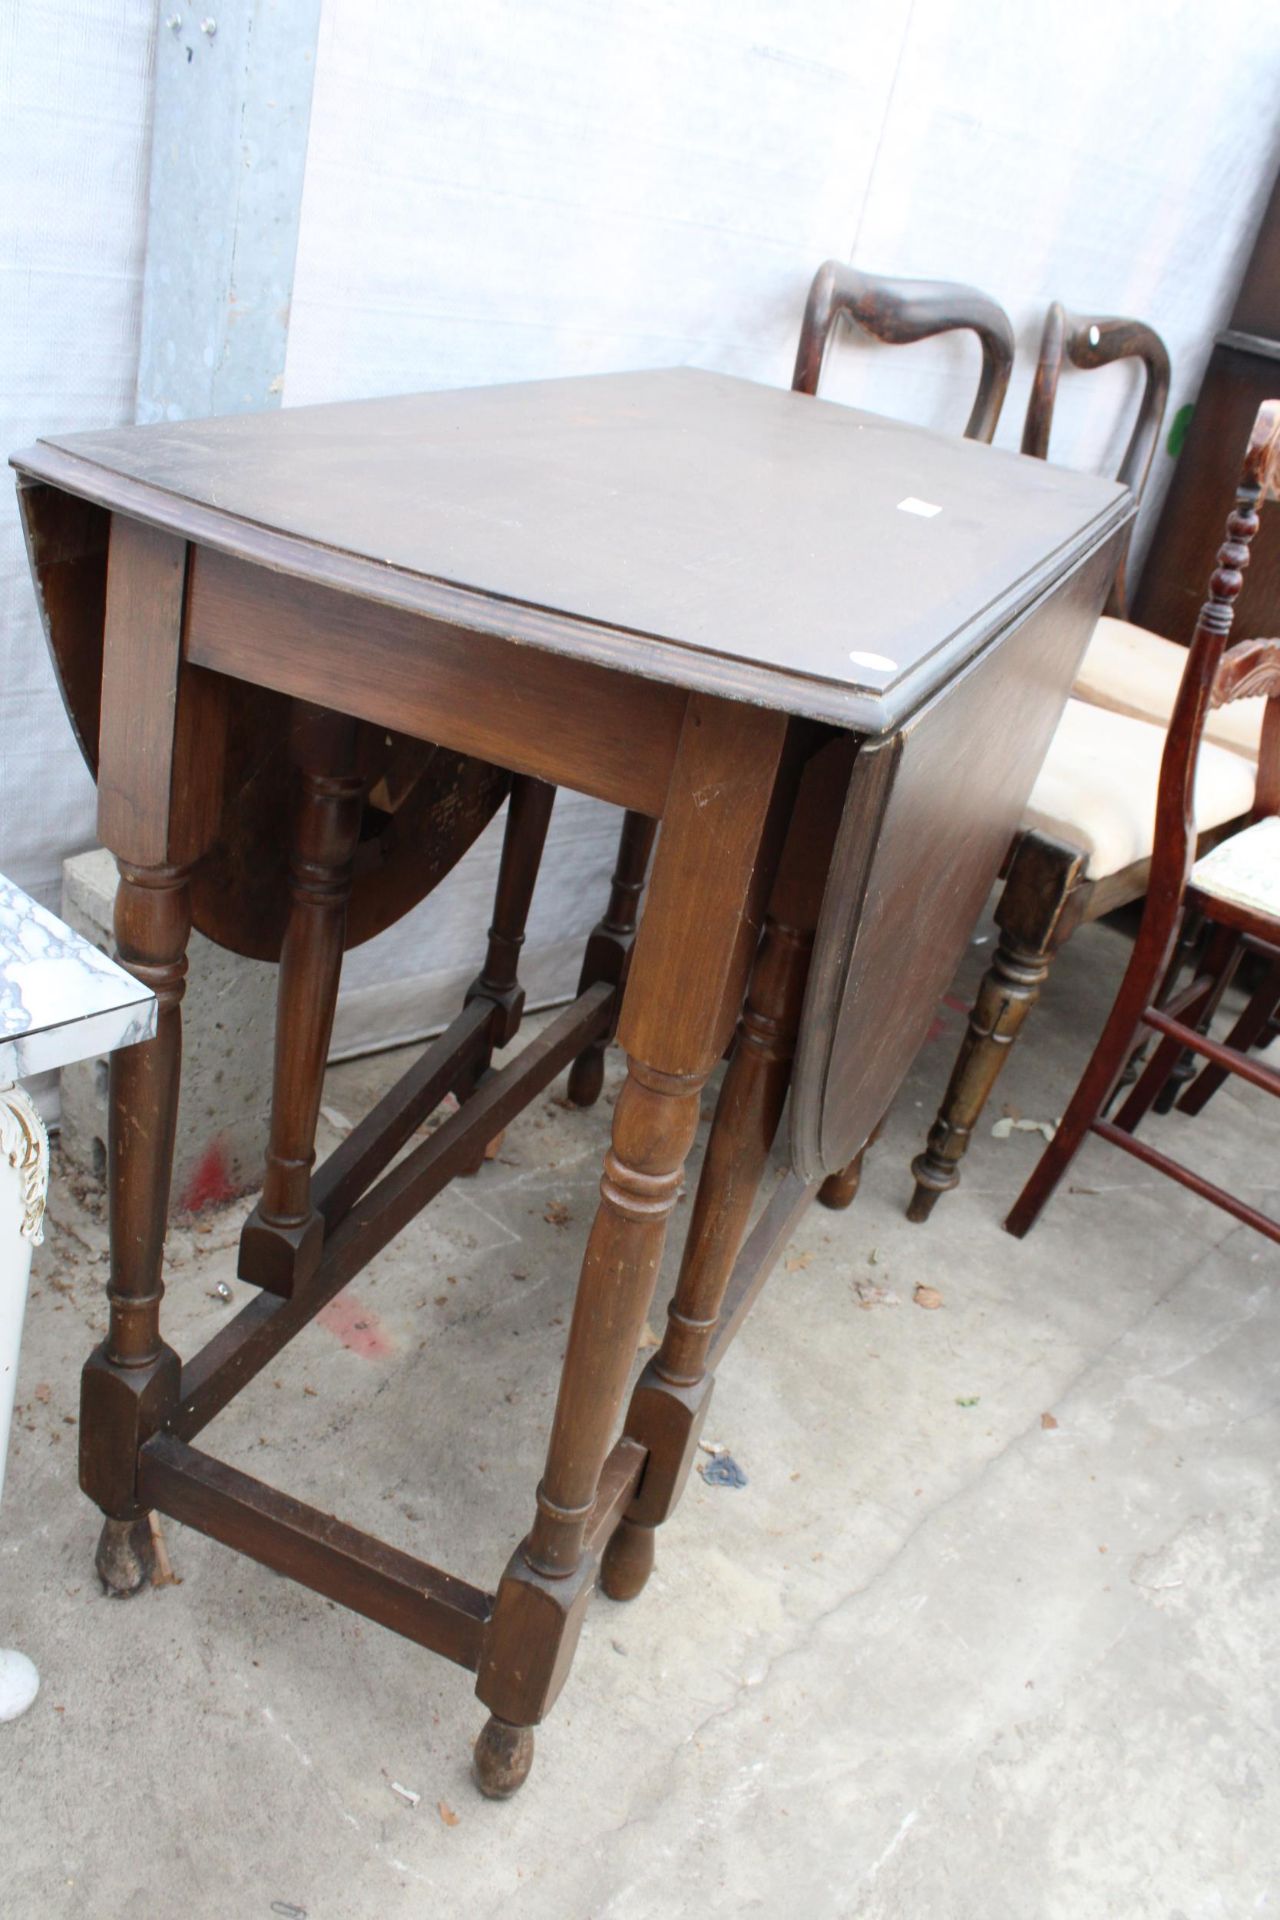 A MID 20TH CENTURY OVAL GATE-LEG TABLE - Image 2 of 2